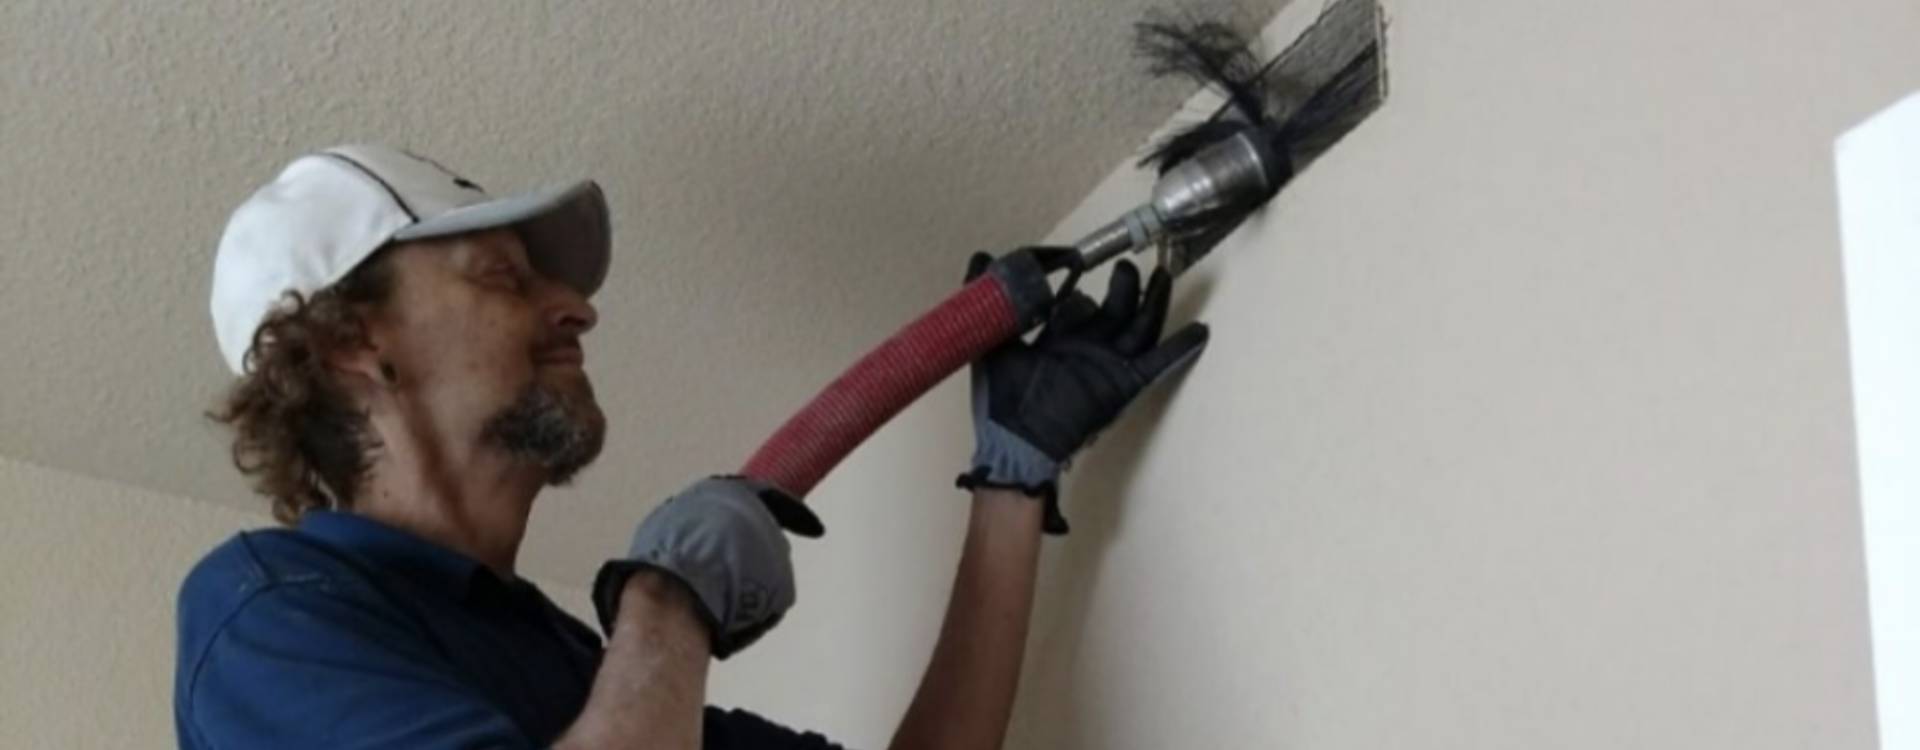 Expert Dryer Vent Cleaning in Colorado Springs | Earth Friendly